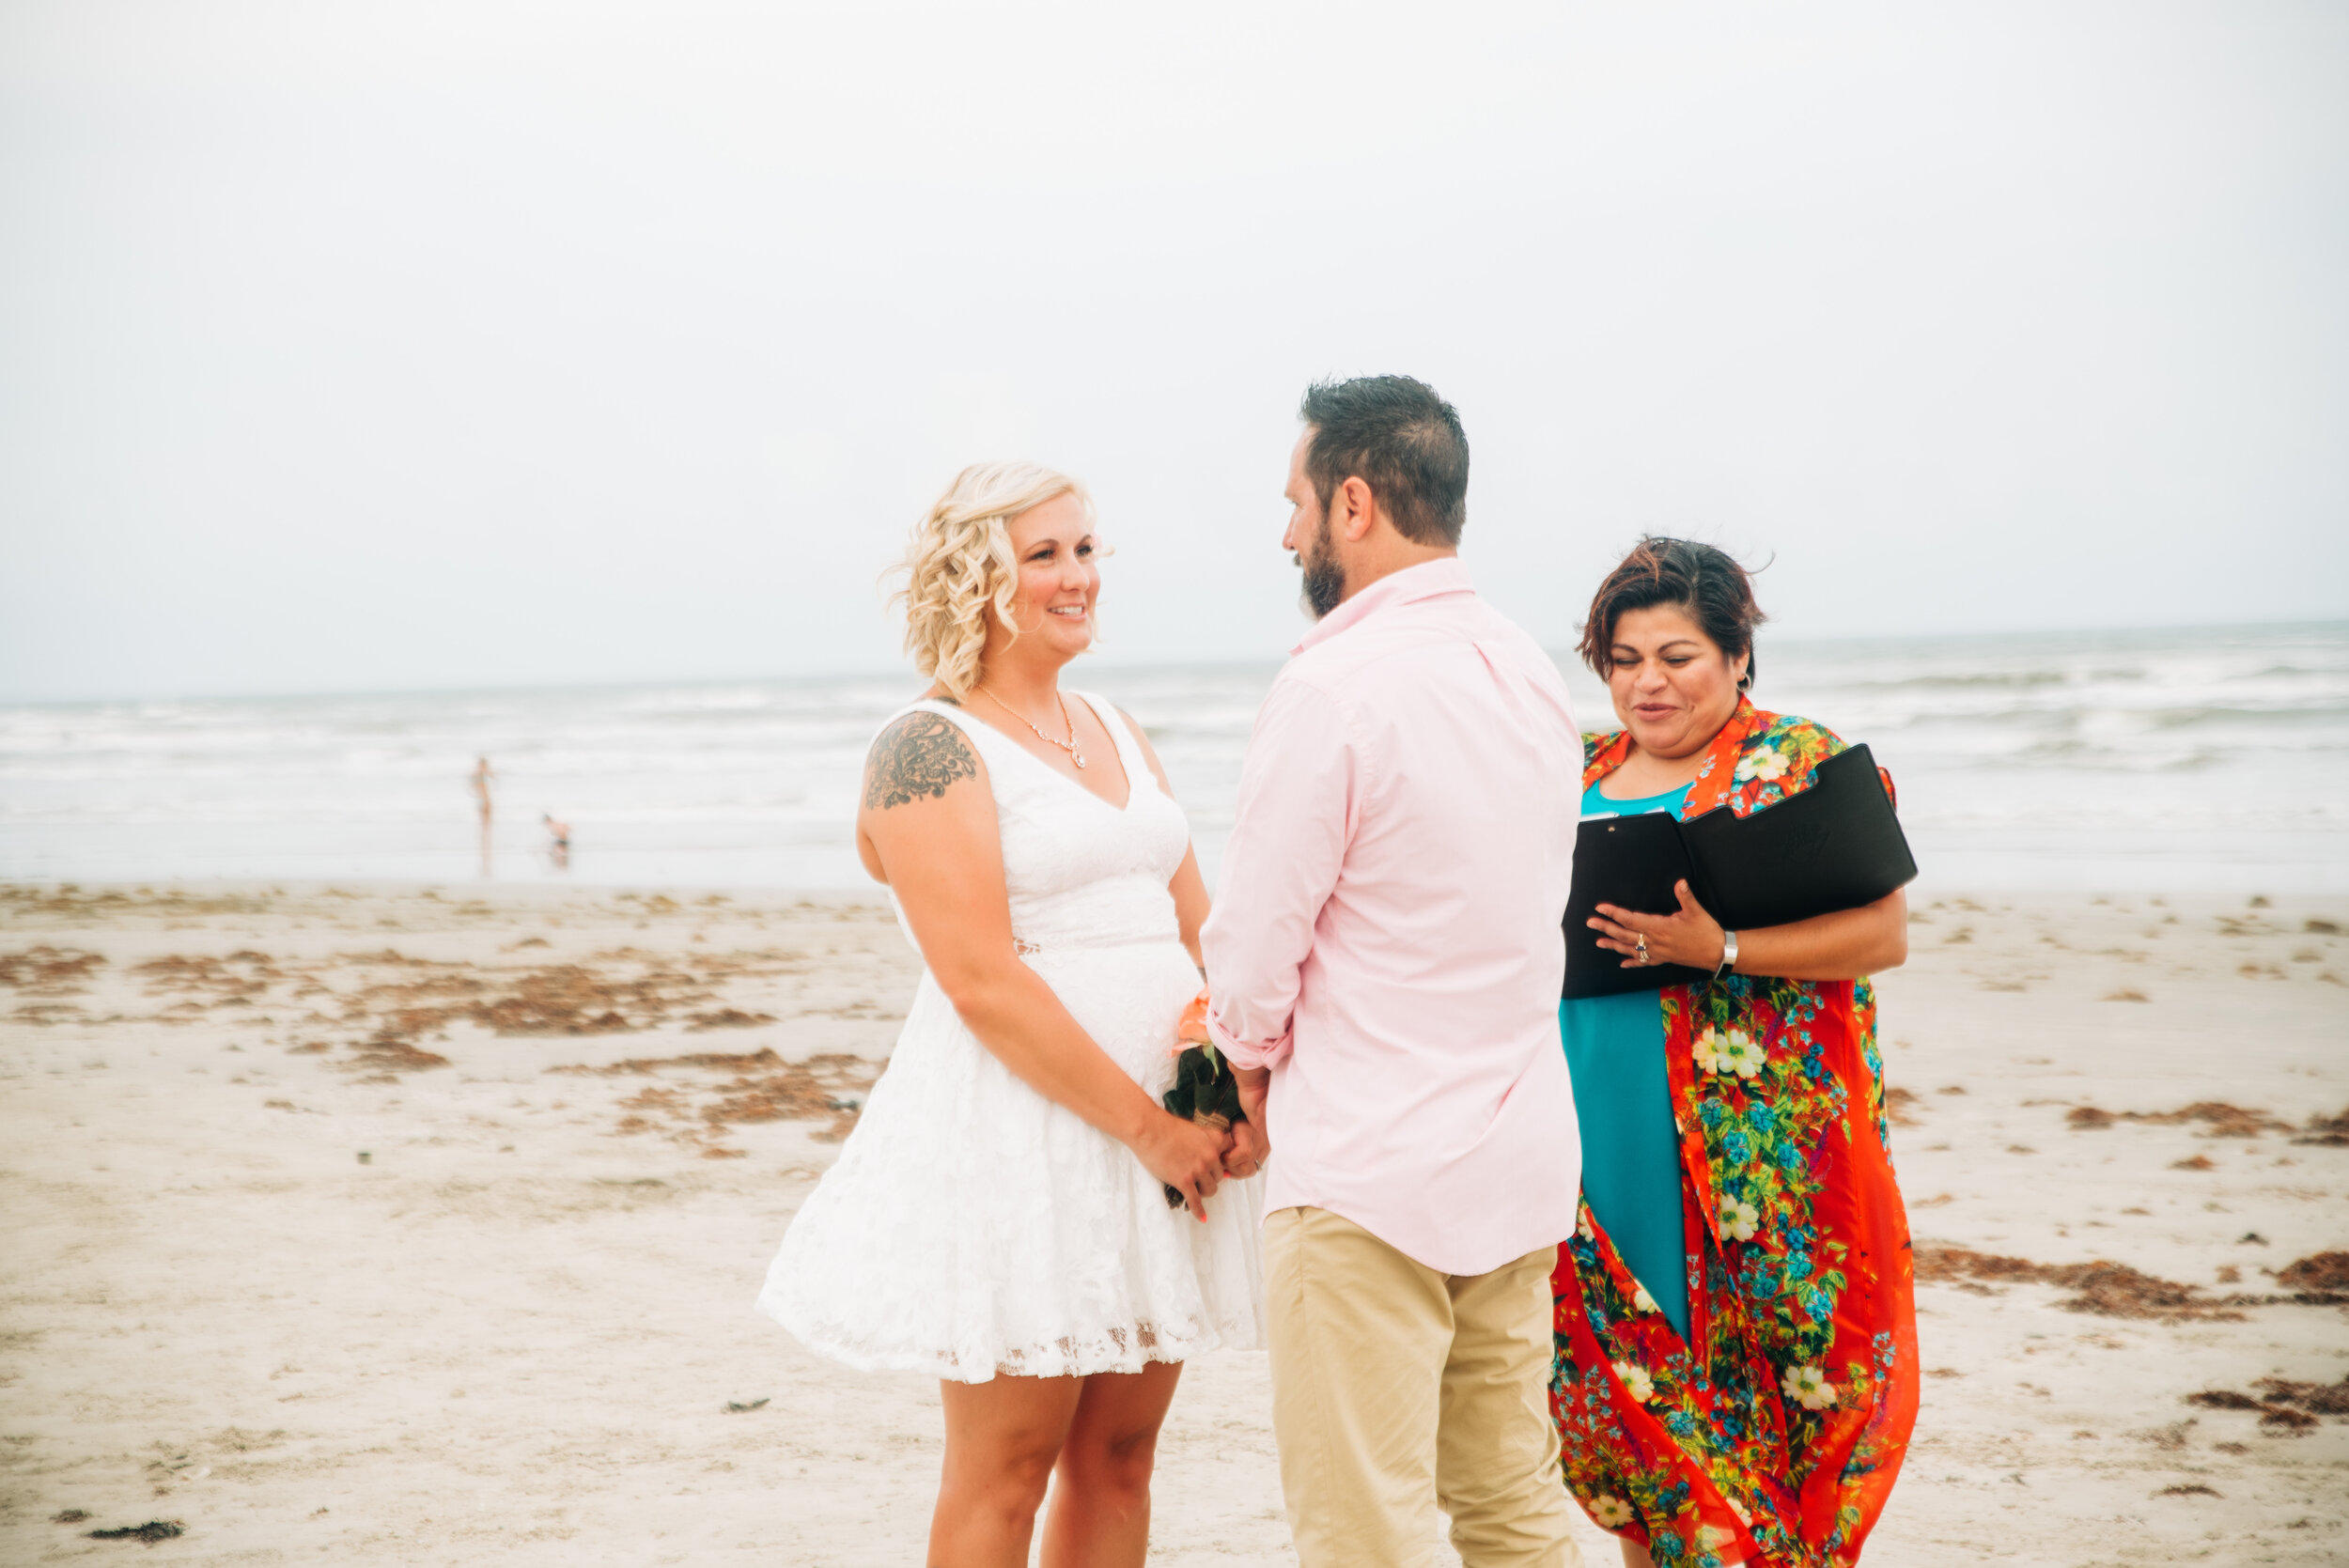 Texas Beach Wedding - Officiated by The Love Officiant 